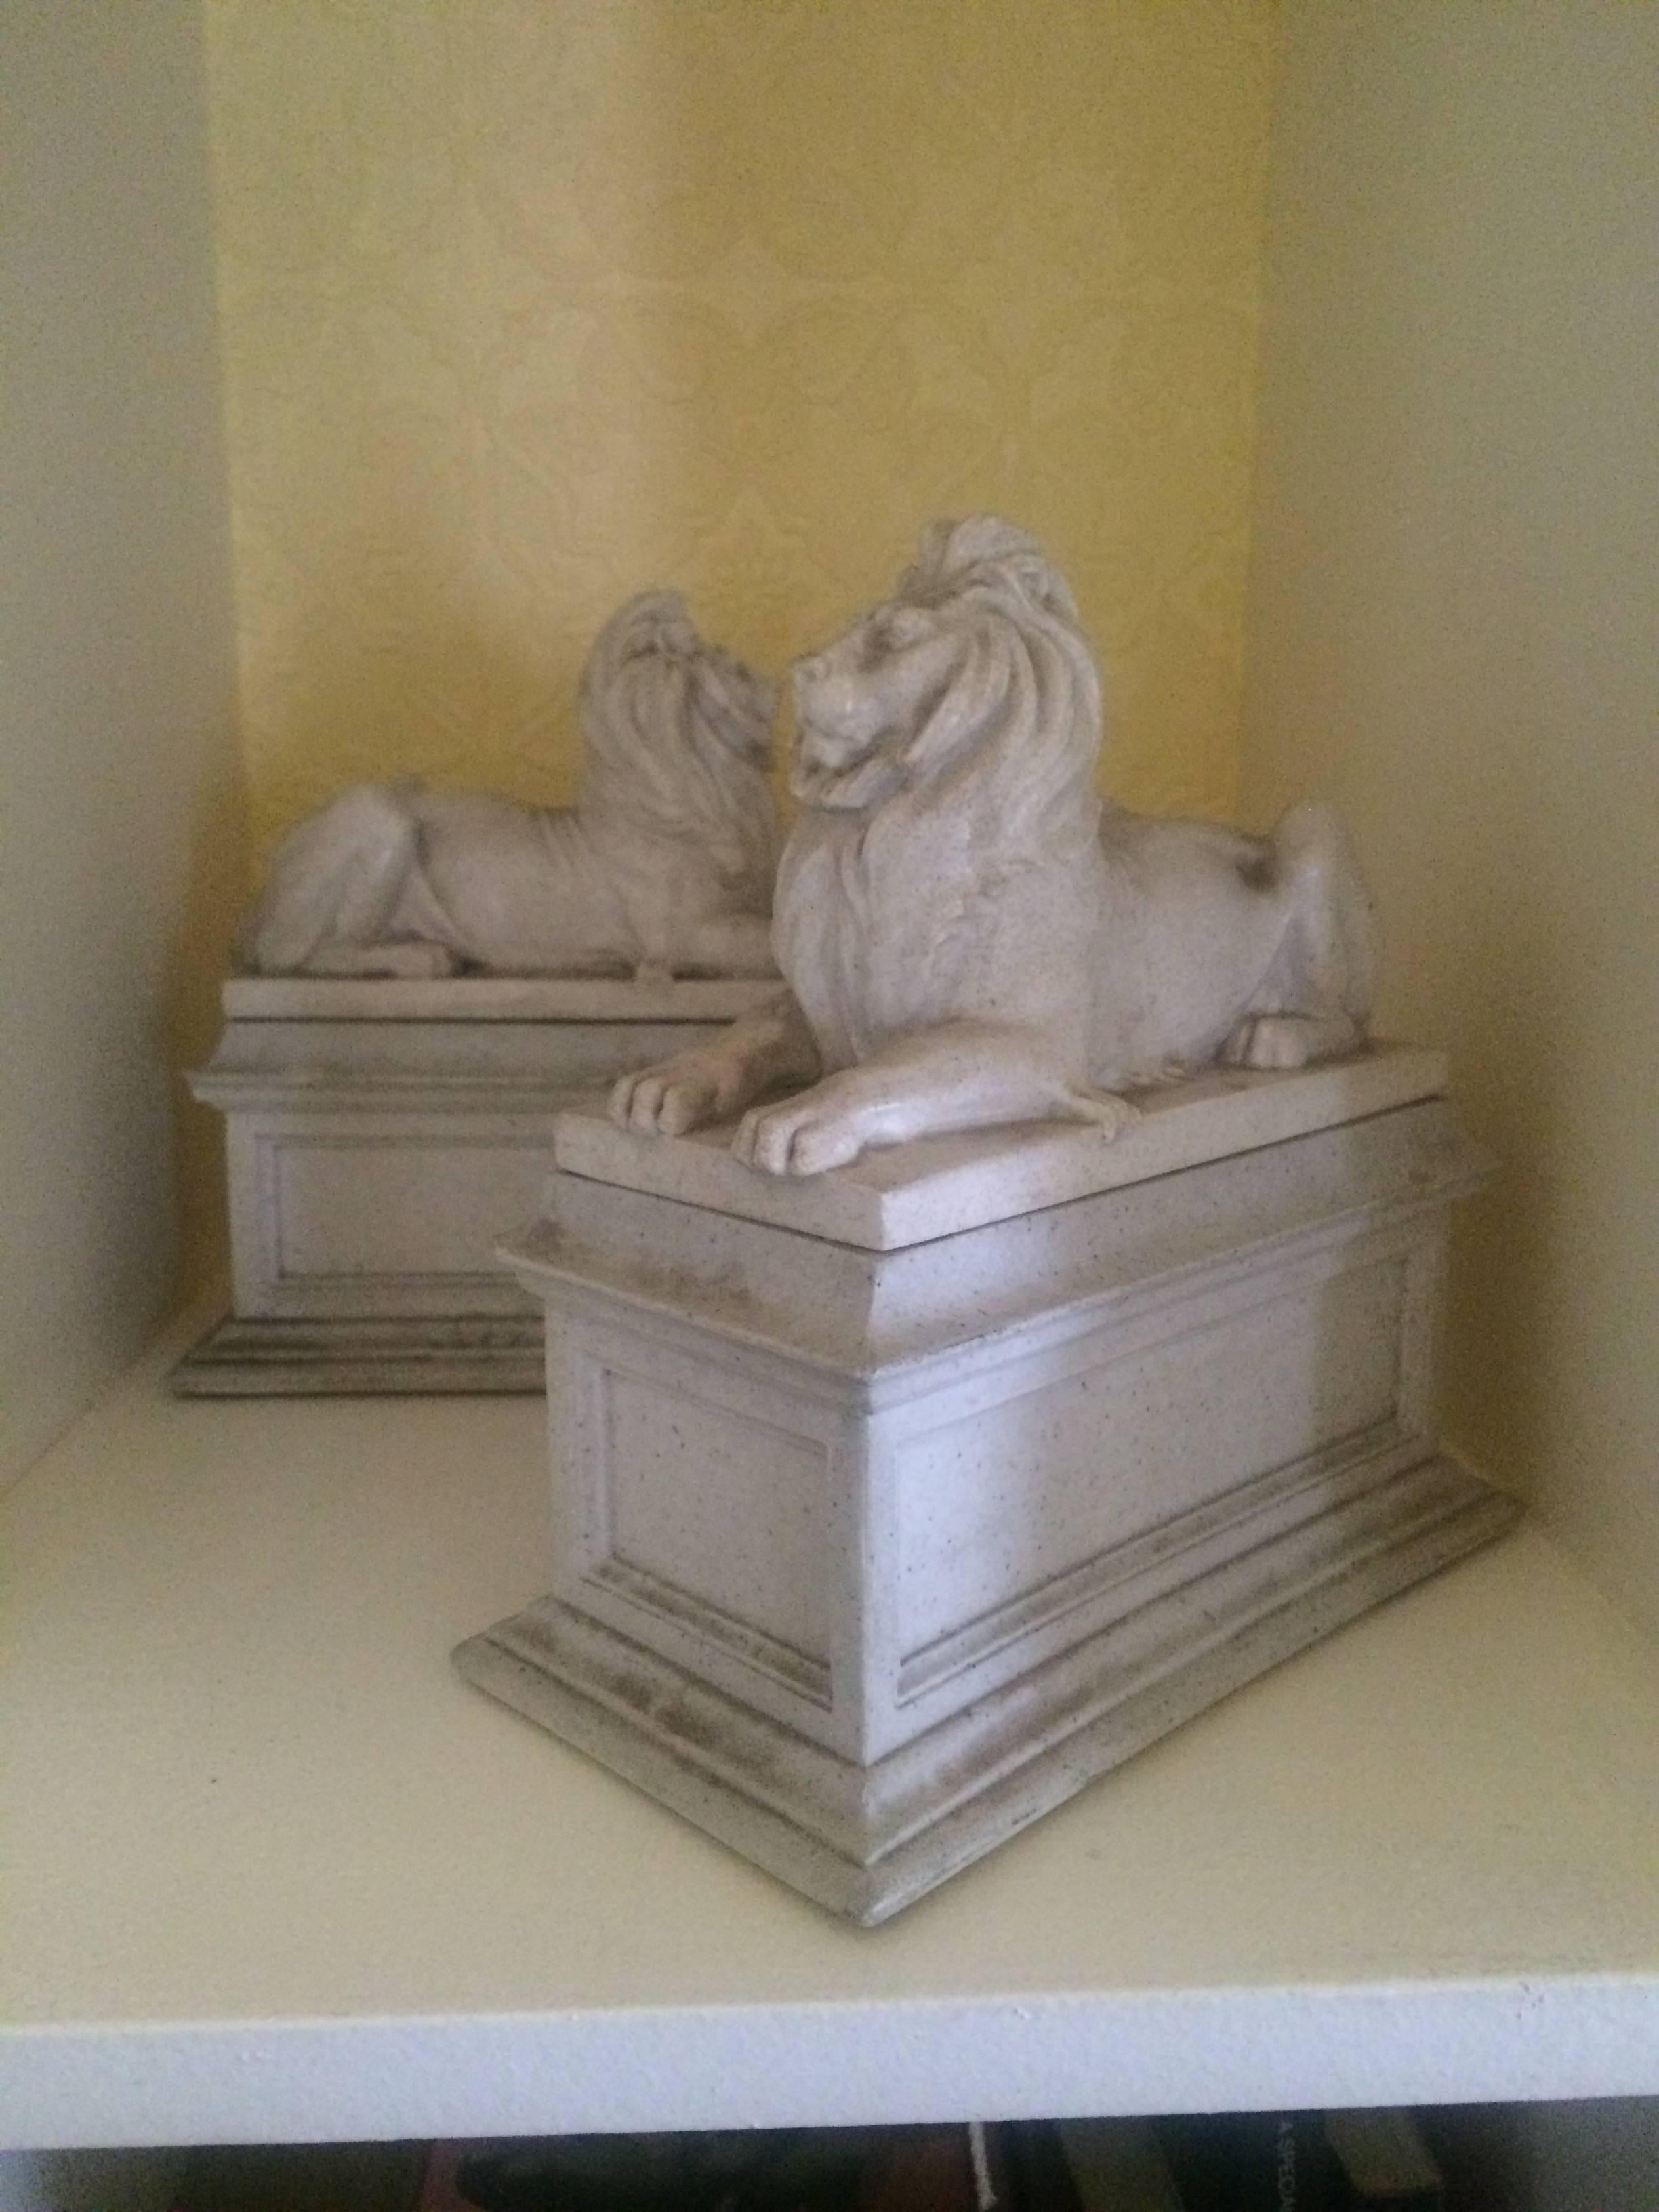 This elegant pair of seated lions are made of a resin or plaster that looks and feels like marble - adding grandeur to the library this pair can flank a seat of books or mix up the nobility in your den or study... also great for a child's reading